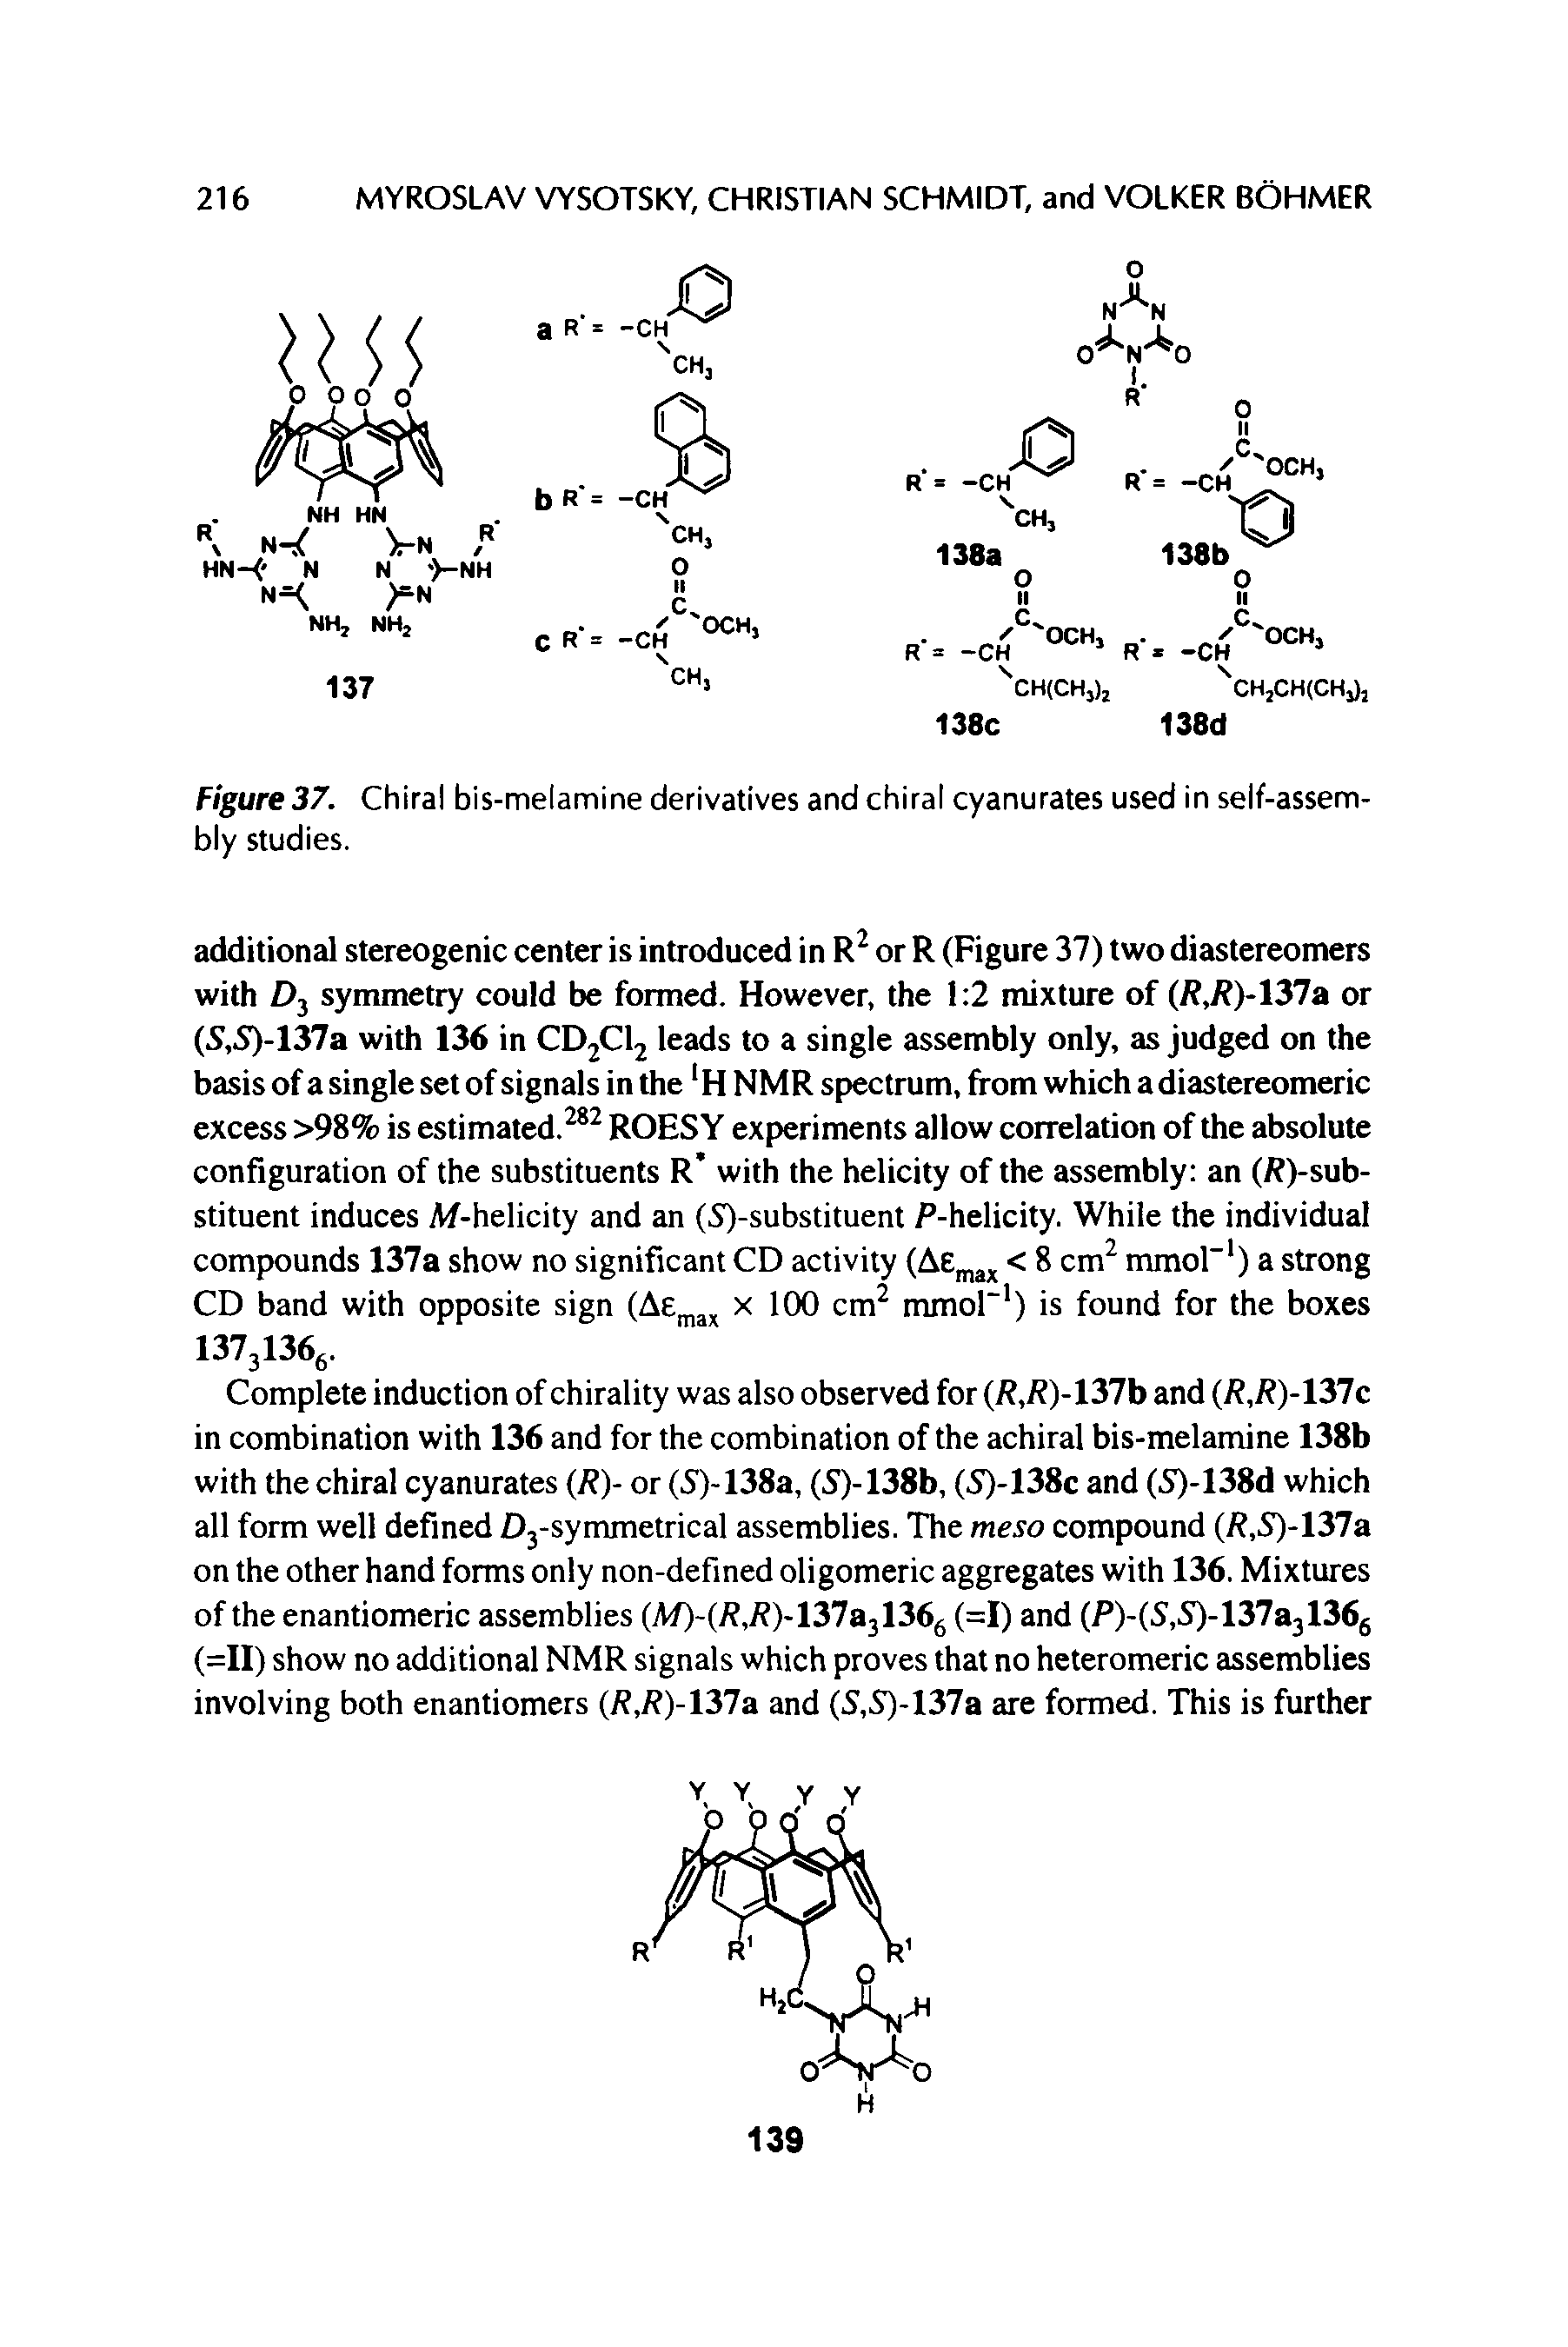 Figure 37. Chiral bis-melamine derivatives and chiral cyanurates used in self-assembly studies.